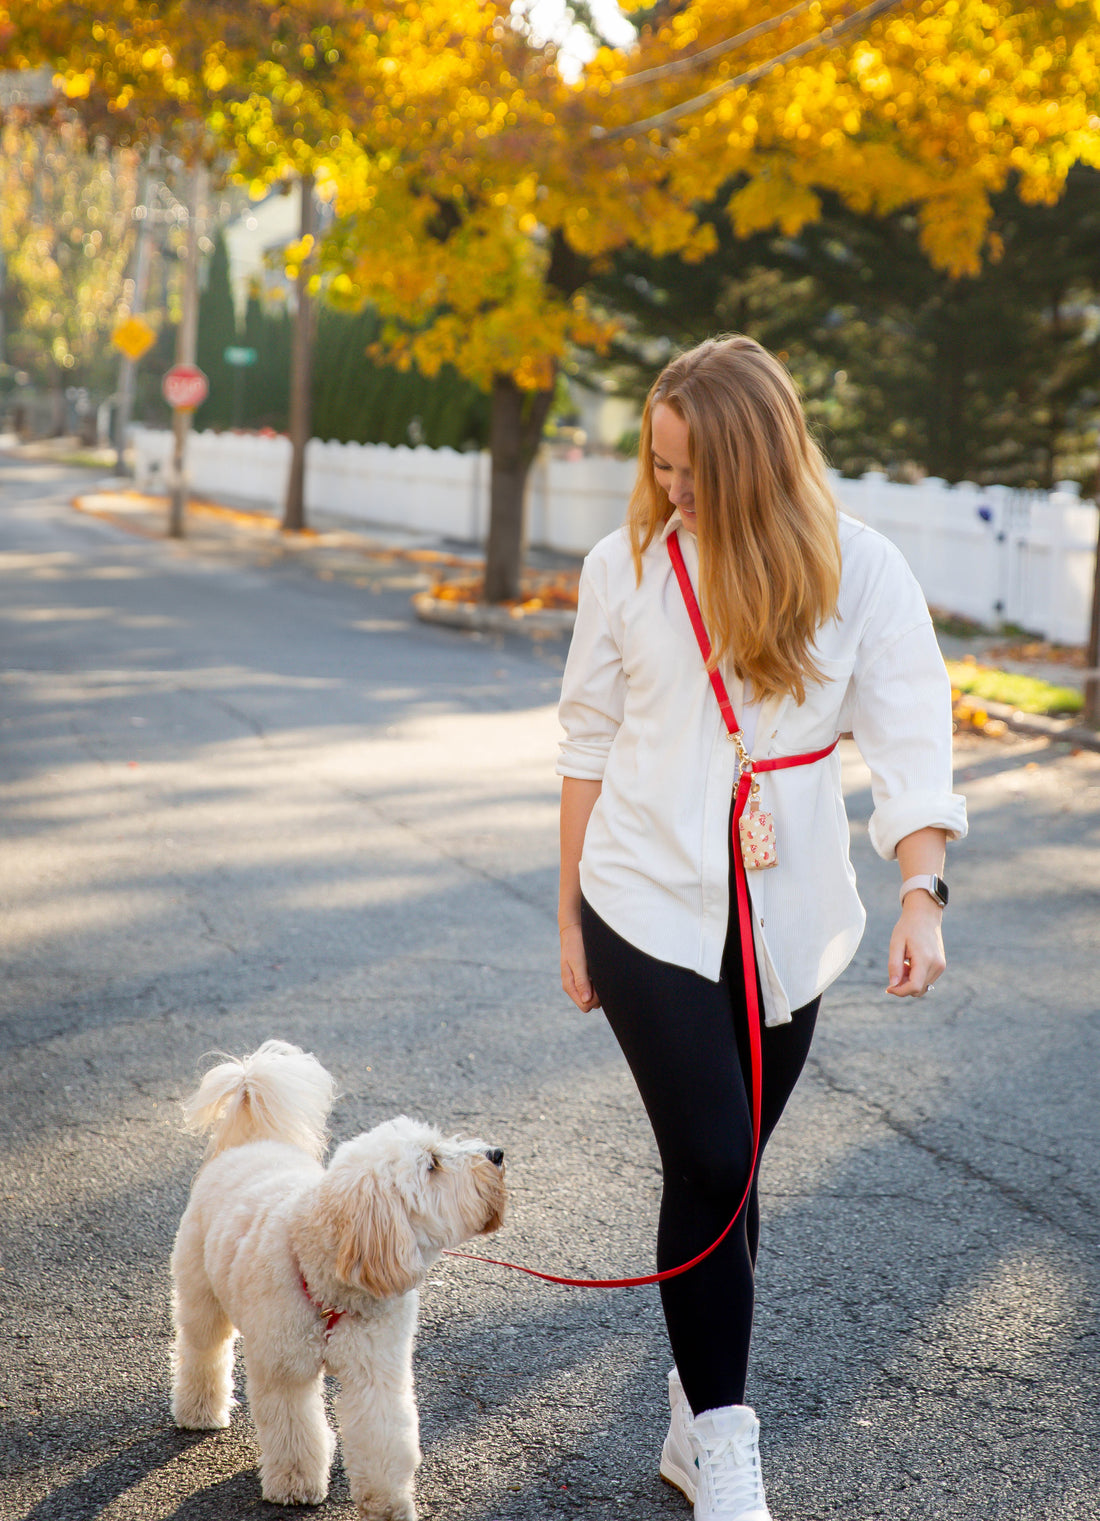 Cherry Red Convertible Hands Free Cloud Dog Leash | Multifunctional, Waterproof, and Lightweight Dog Leash | Shop Sunny Tails